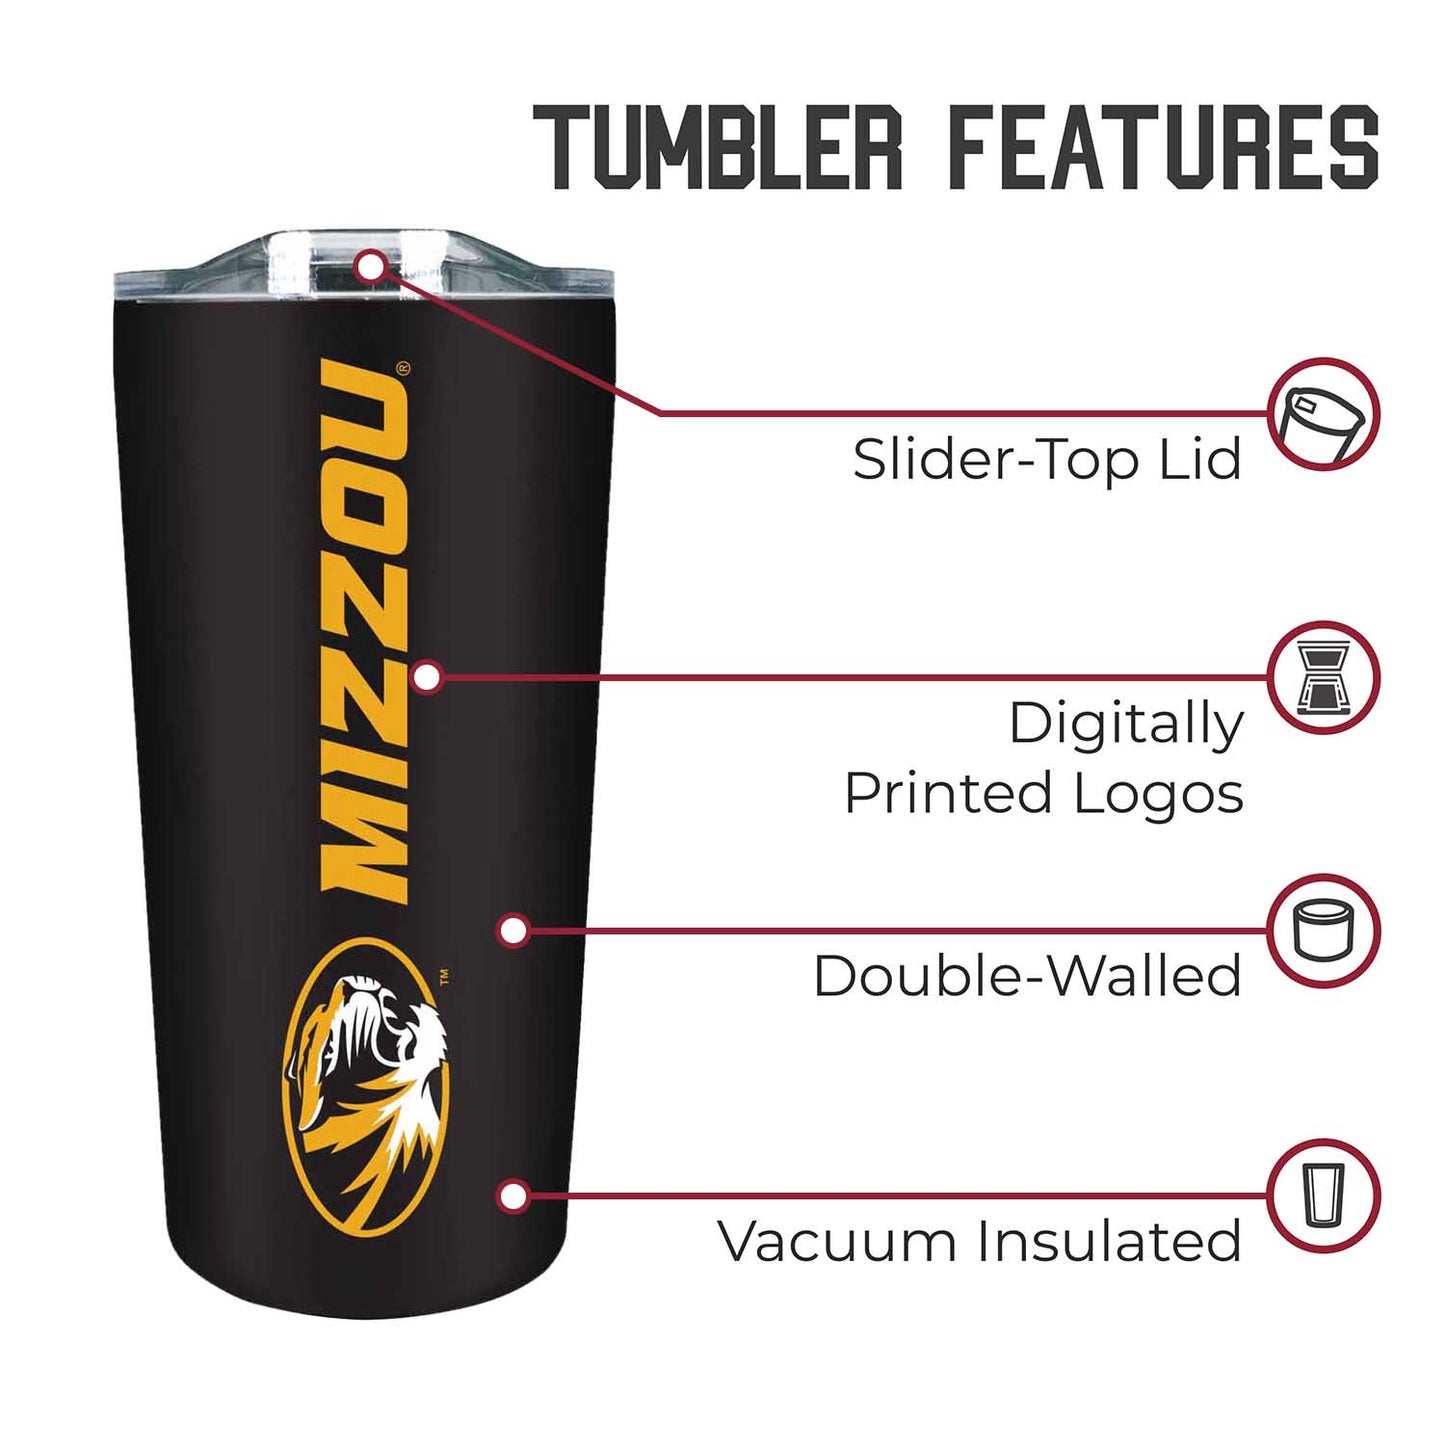 Missouri Tigers NCAA Stainless Steel Tumbler perfect for Gameday - Black